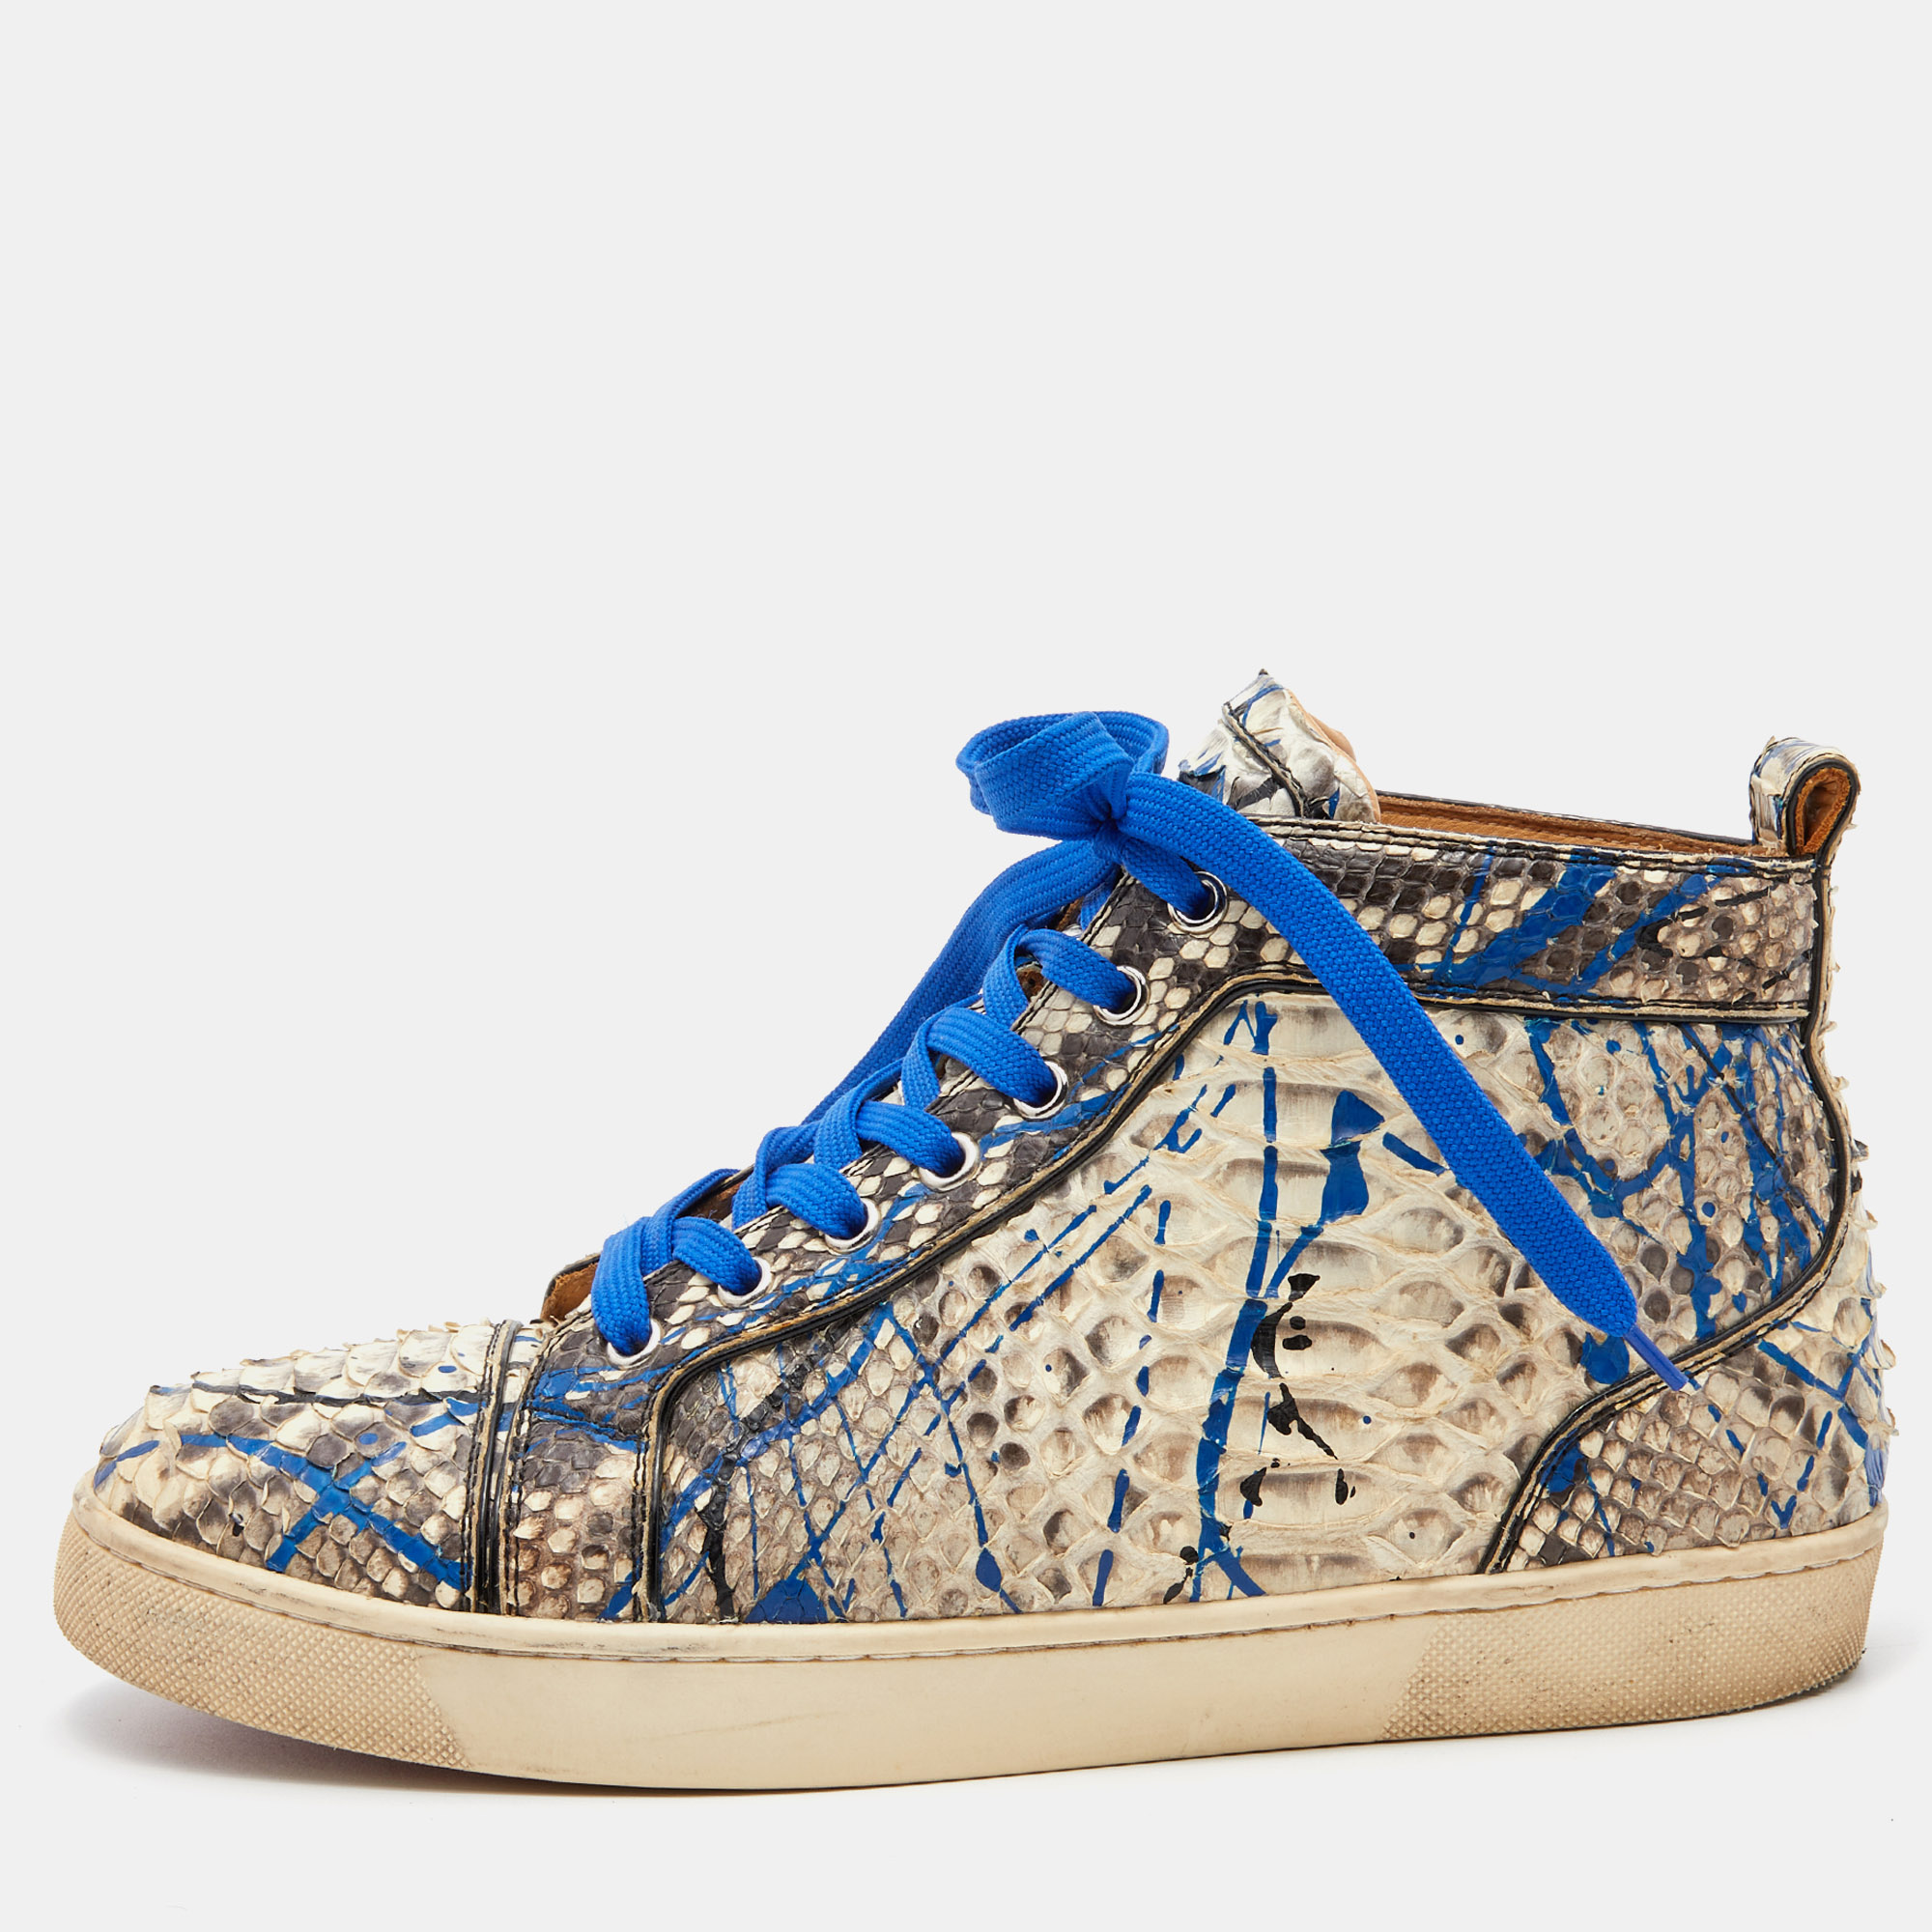 Pre-owned Christian Louboutin Blue/grey Python Leather Graffiti Louis Flat High Top Sneakers Size 41